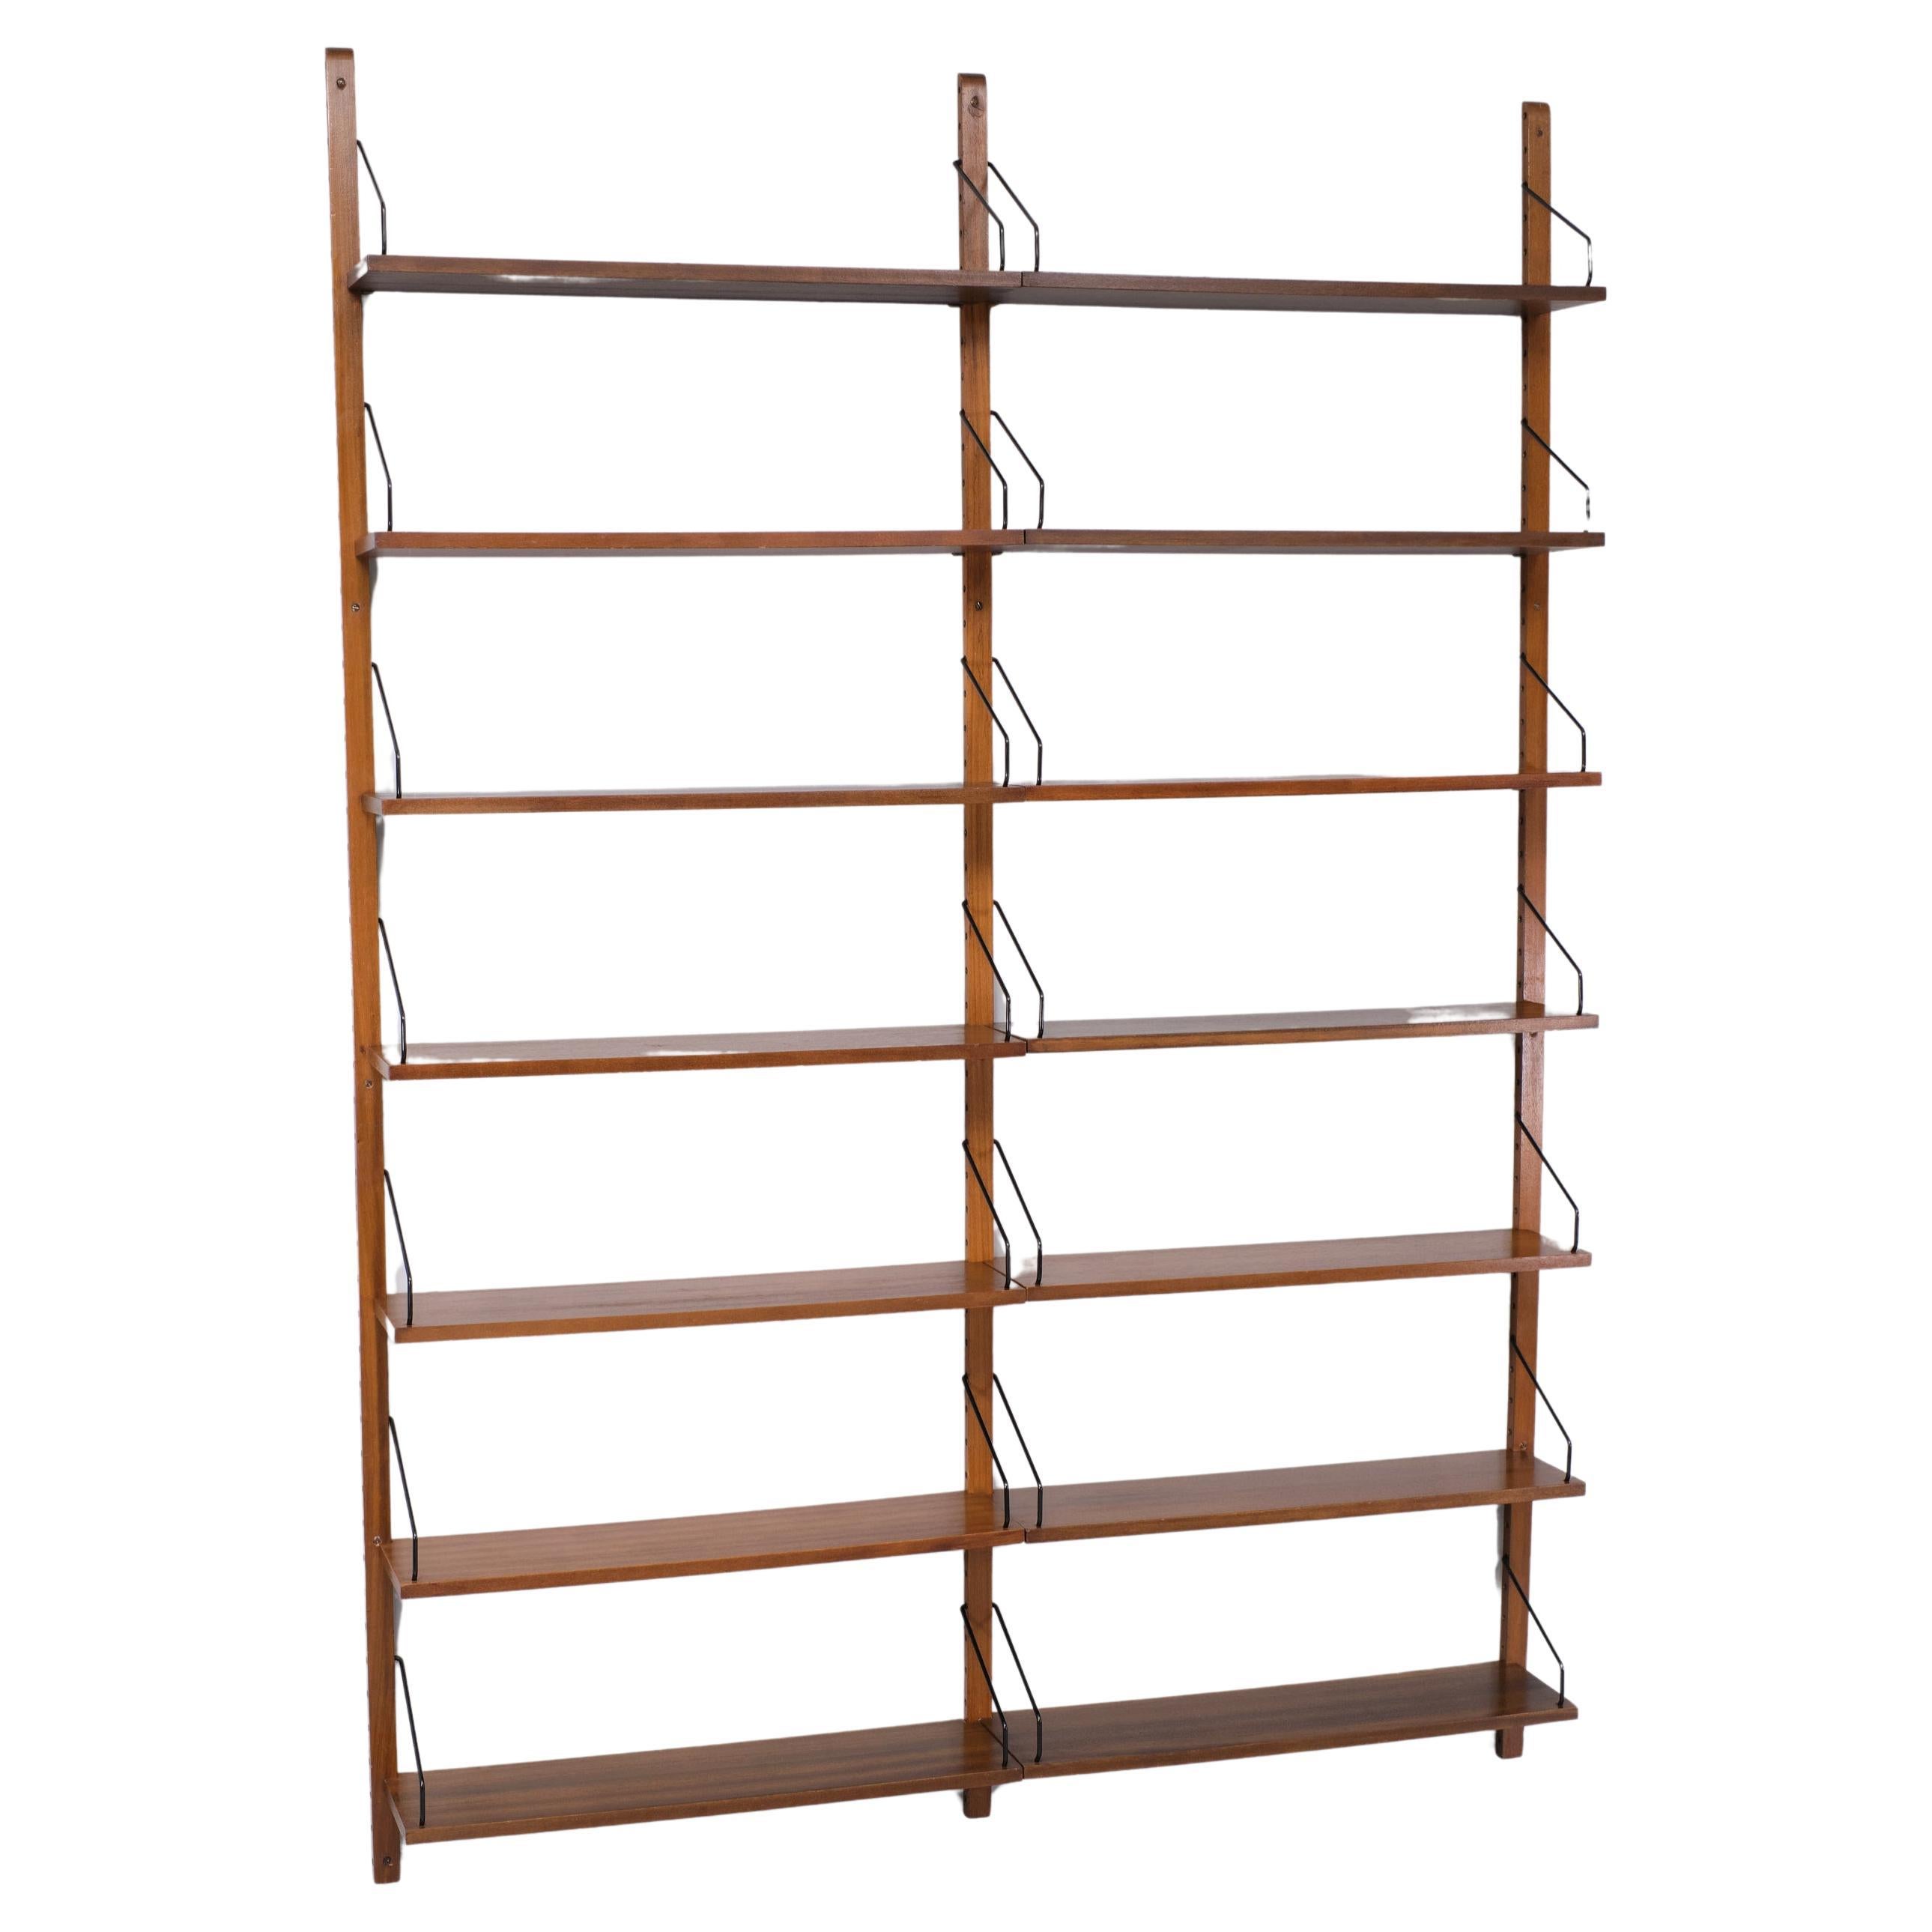 Very nice High Wall Unit by  Poul Cadovius  ideal bookcase . Three high 
uprights . comes with 14 shelves ,and all its original hardware . even there 
original Brass screws .  signed .  Good condition. 

Please don't hesitate to reach out for